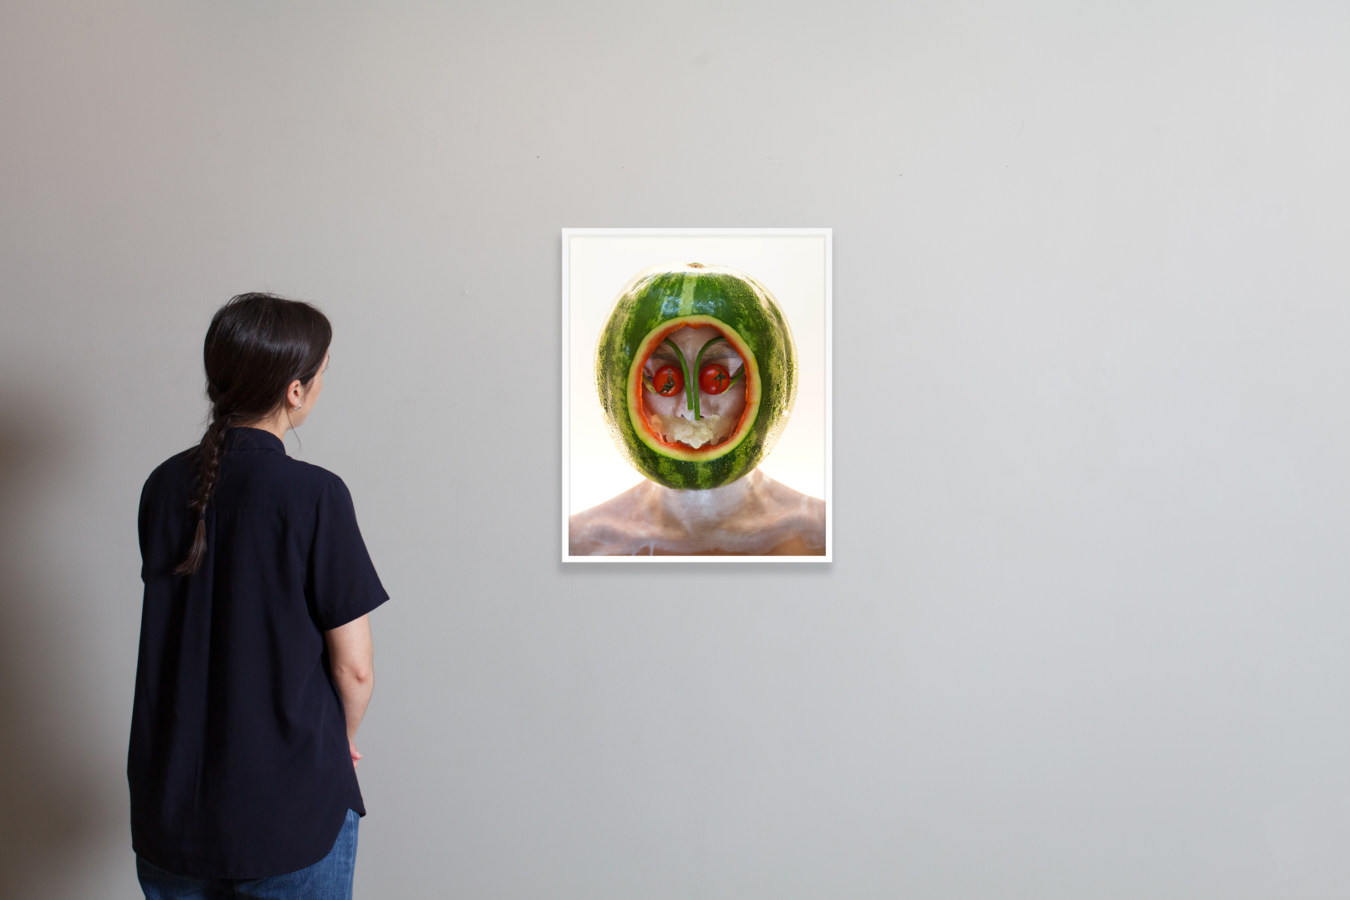 Installation photograph of a person observing a framed color photograph of a person with a watermelon over their head.